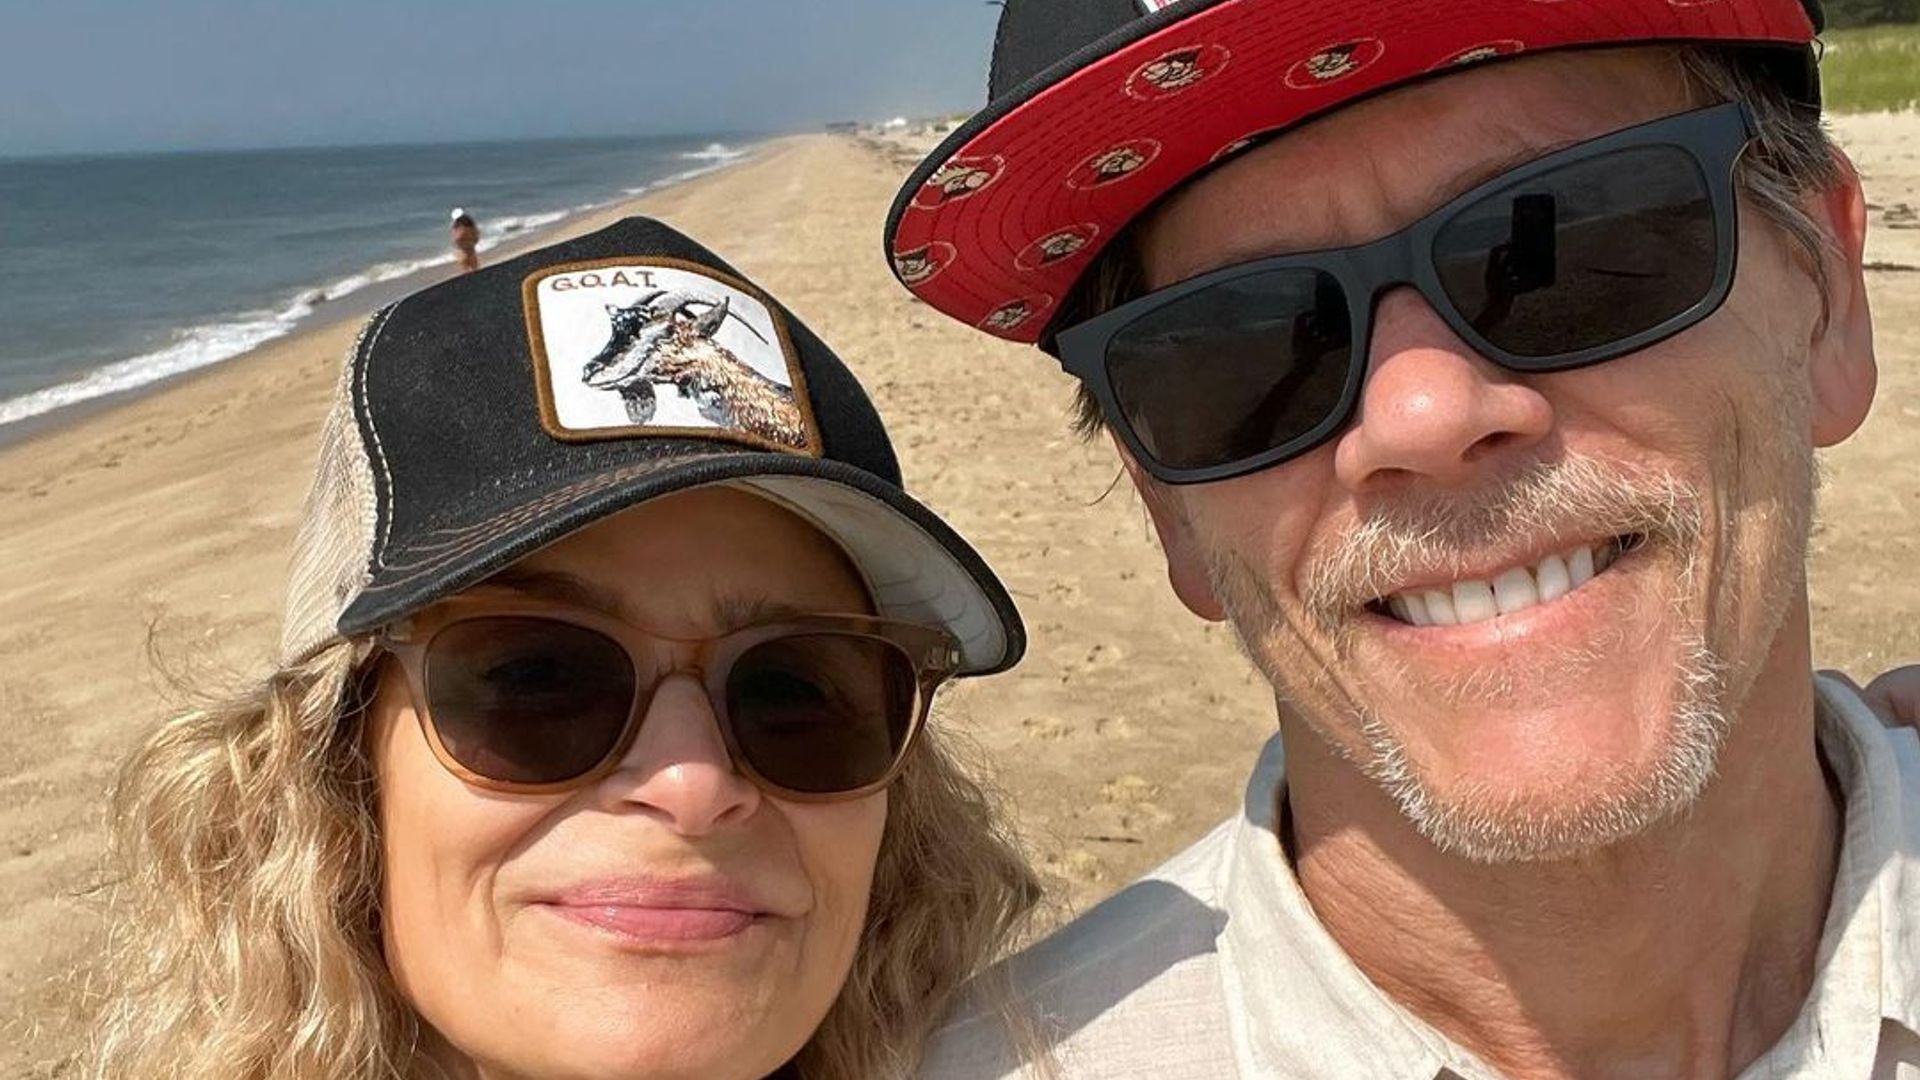 Kyra Sedgwick, 58, shows off natural beauty in makeup-free beach photo that leaves fans in awe